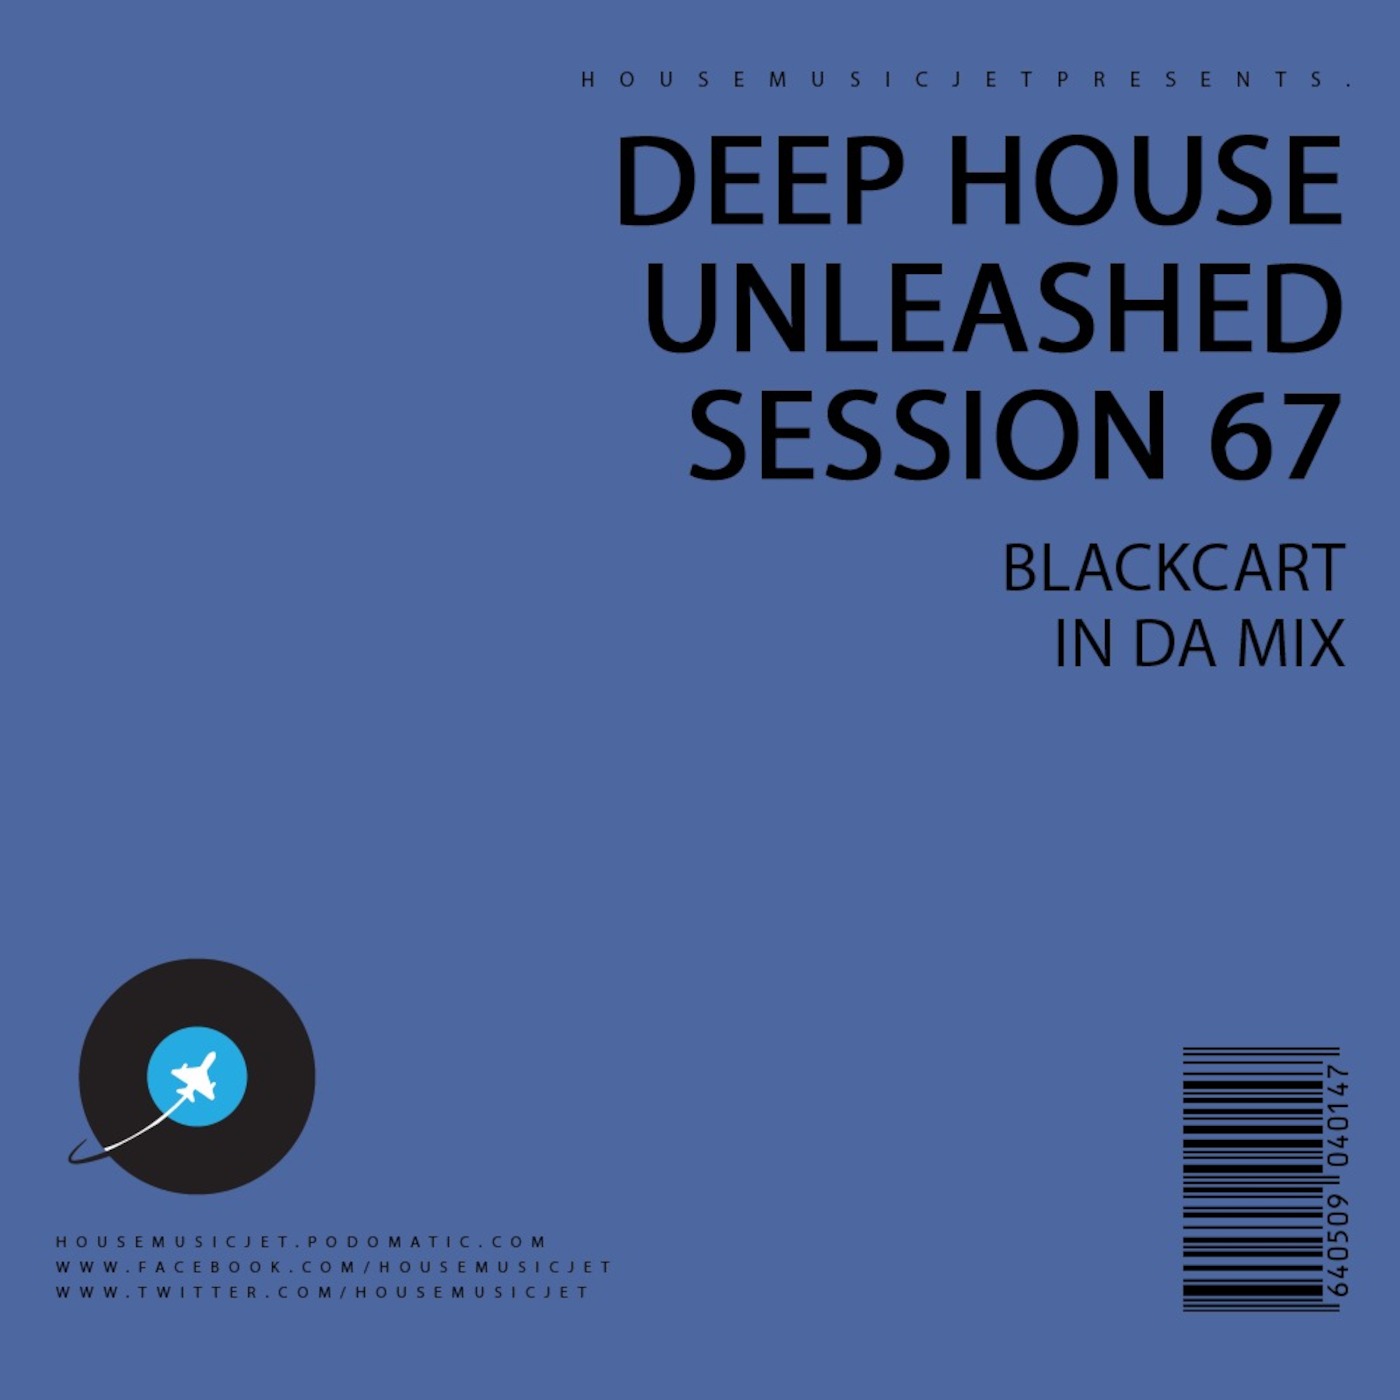 Blackcart In Da Mix - Deep House Unleashed Session 67